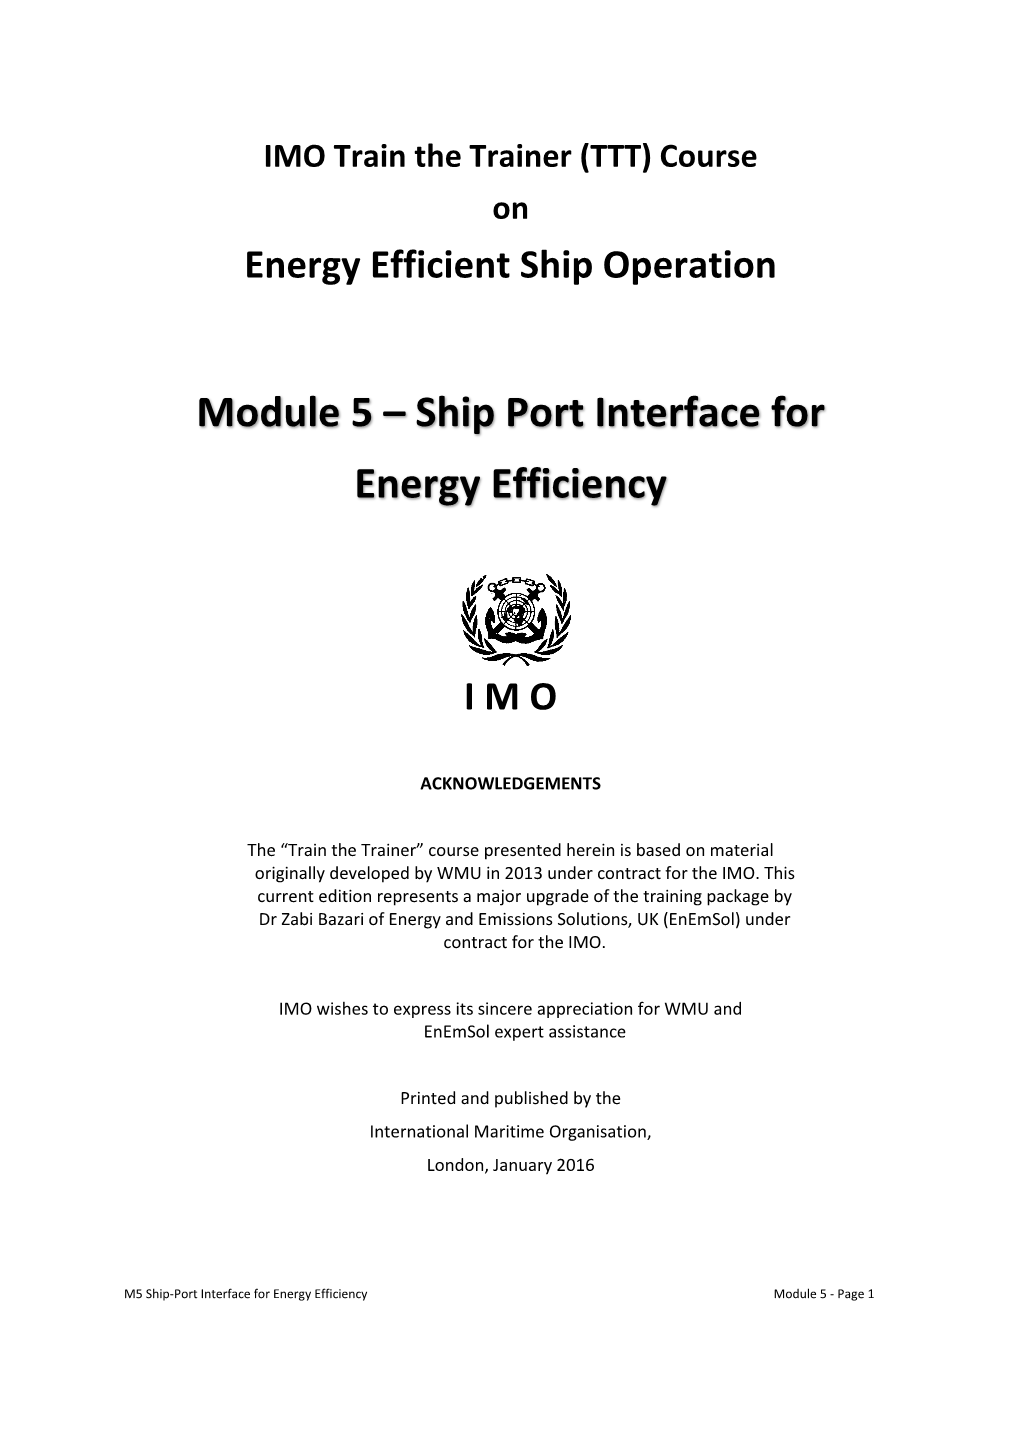 Module 5 – Ship Port Interface for Energy Efficiency